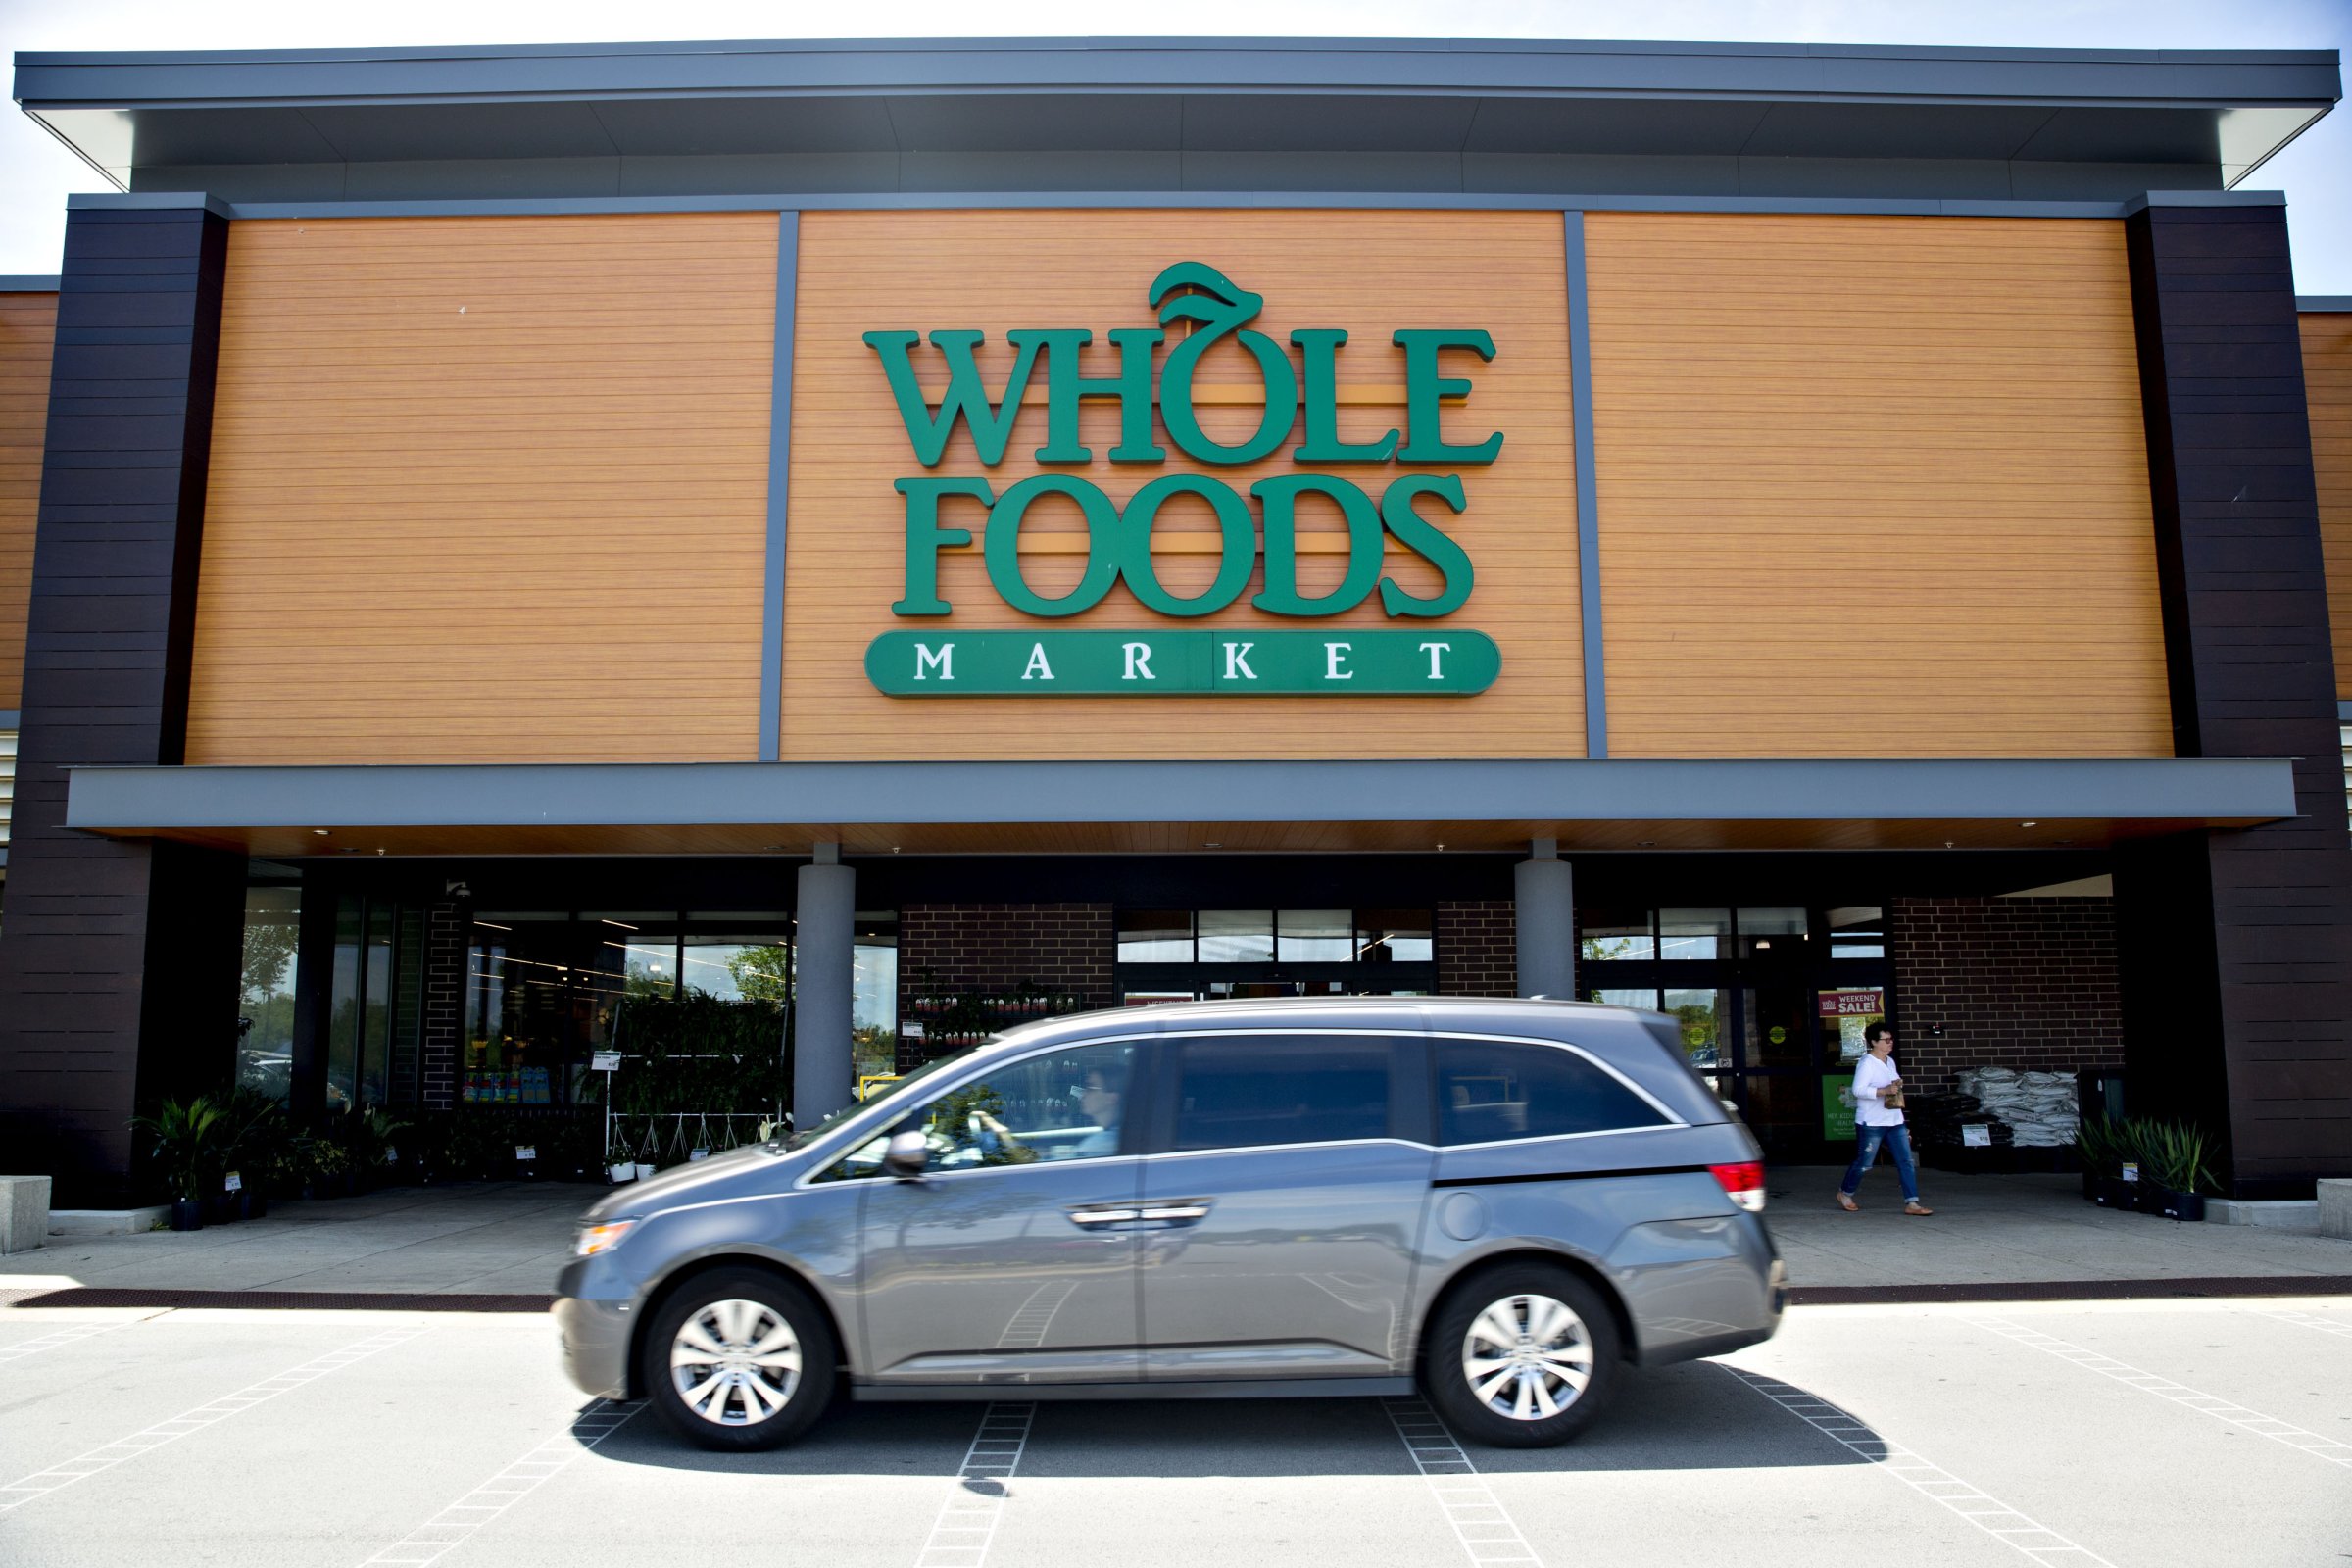 Amazon To Buy Whole Foods In $13.7 Billion Bet On Groceries